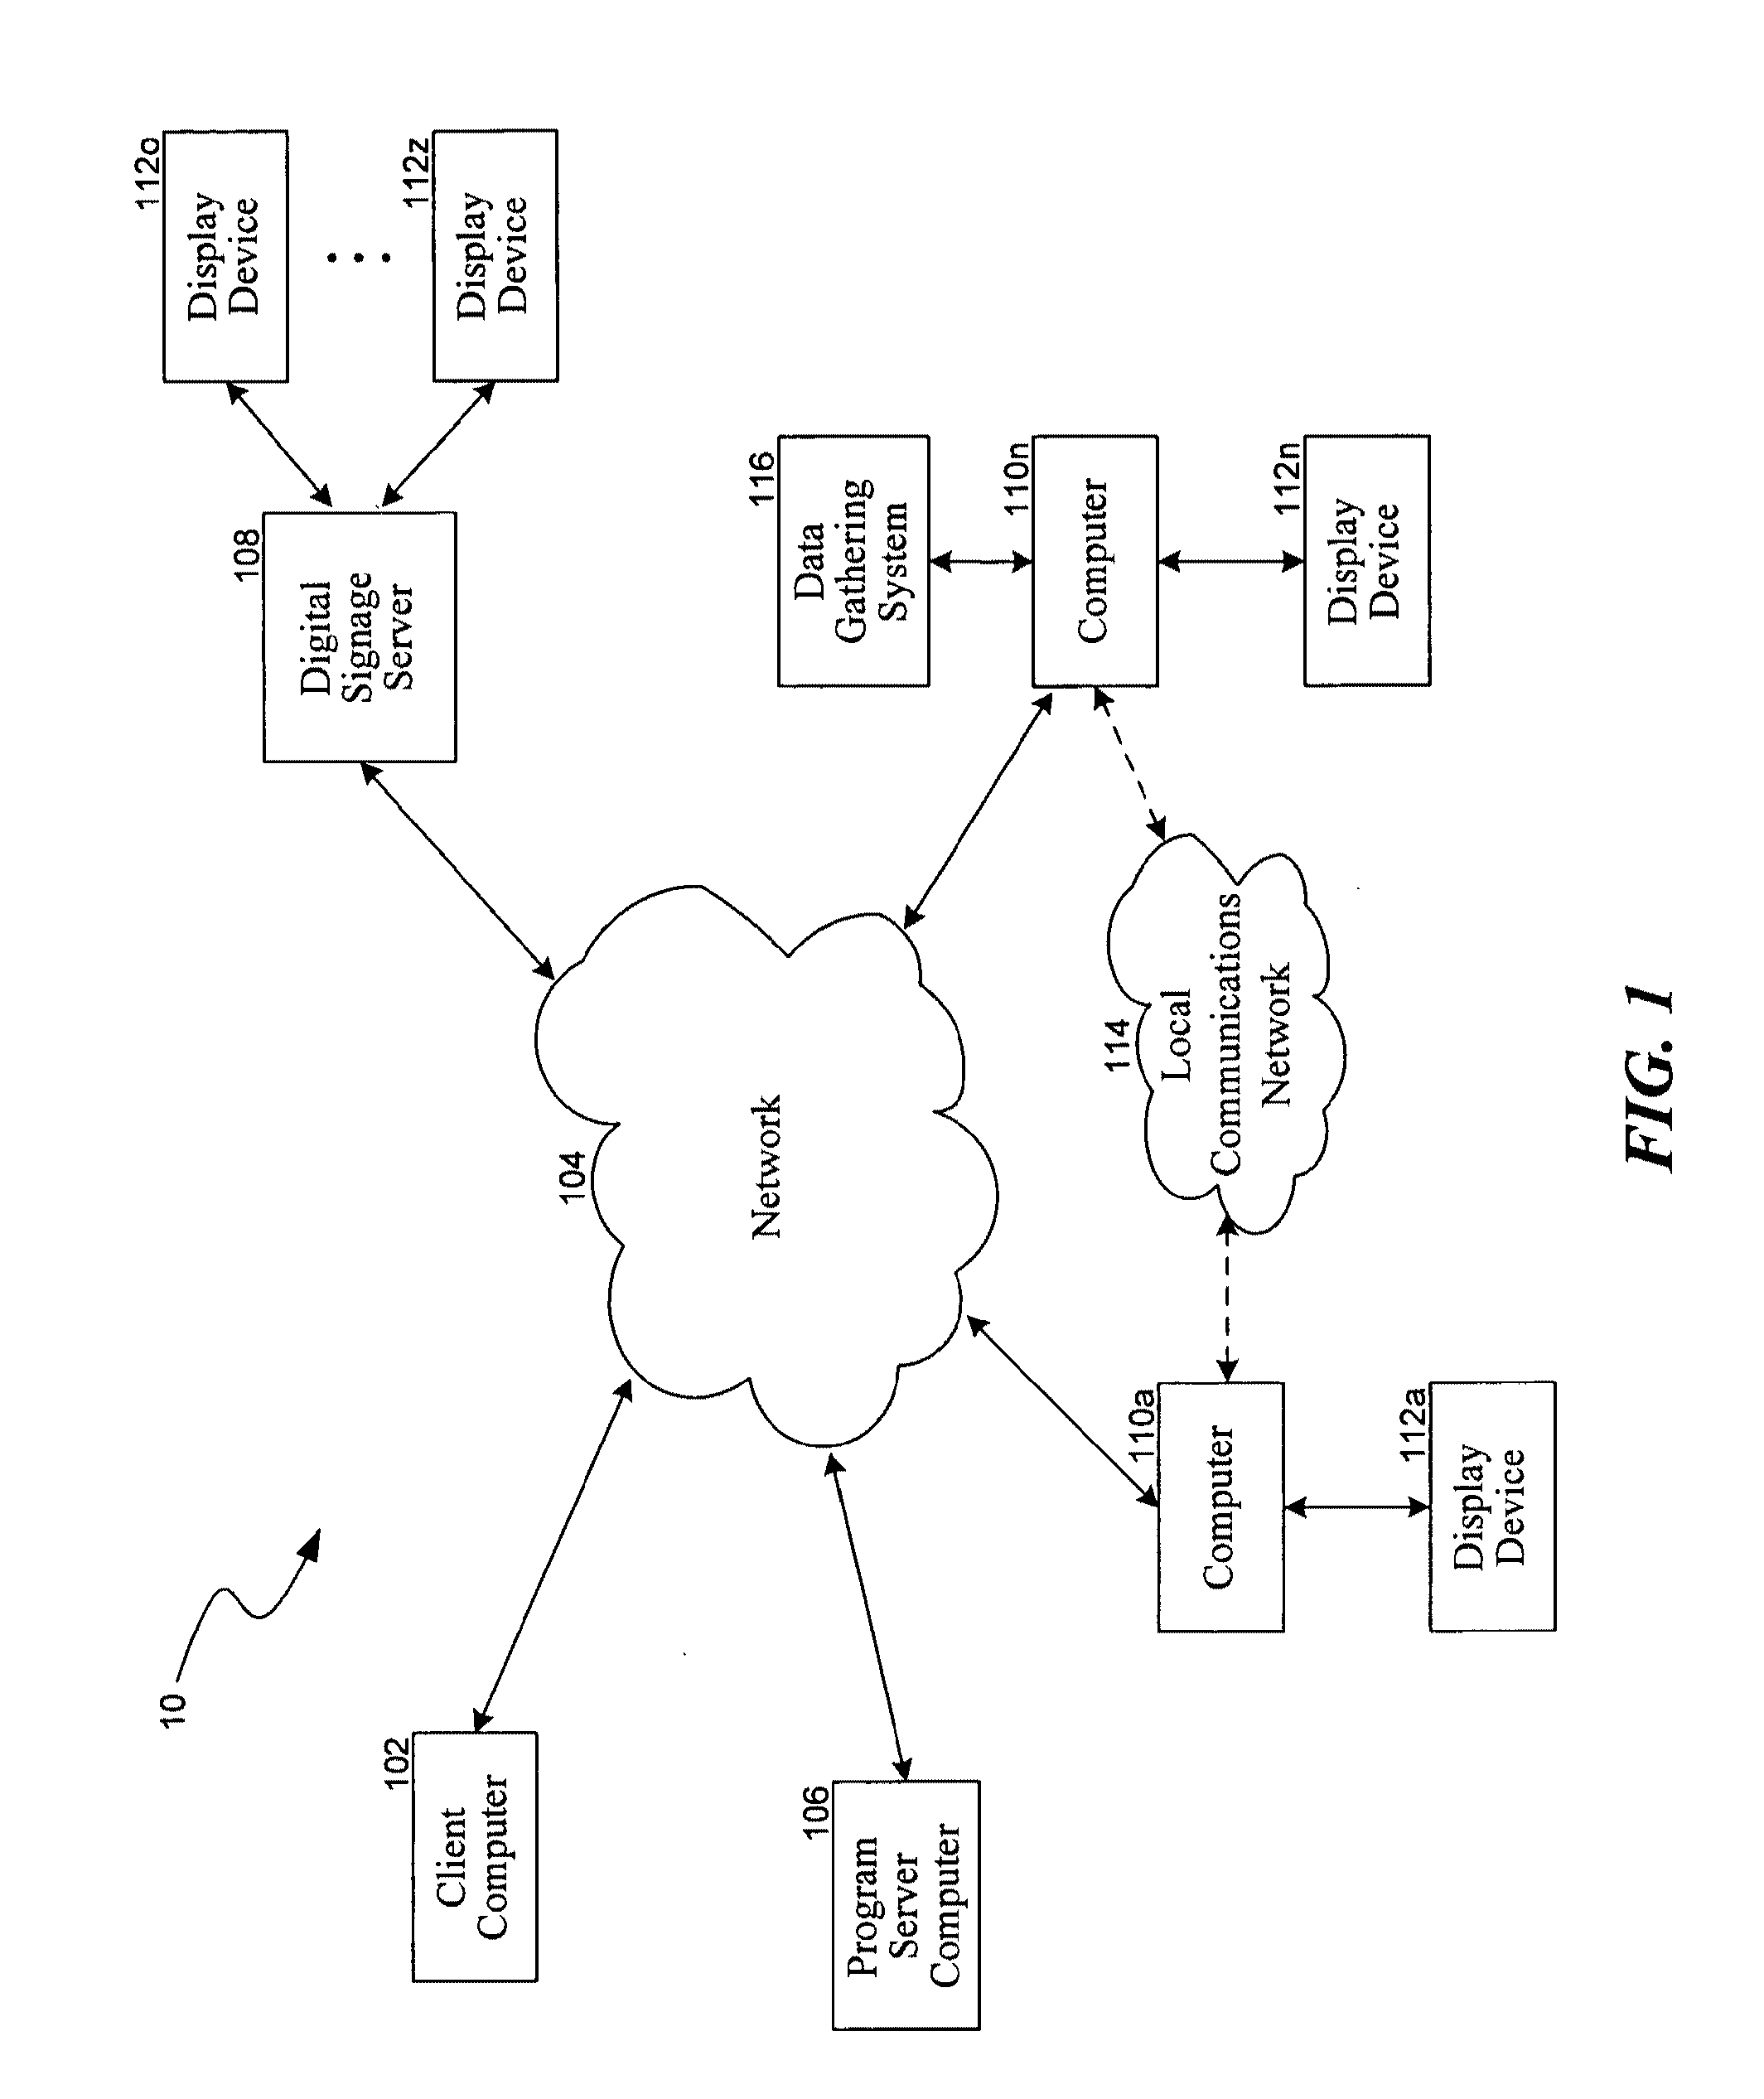 System and method for delivering and optimizing media programming in public spaces